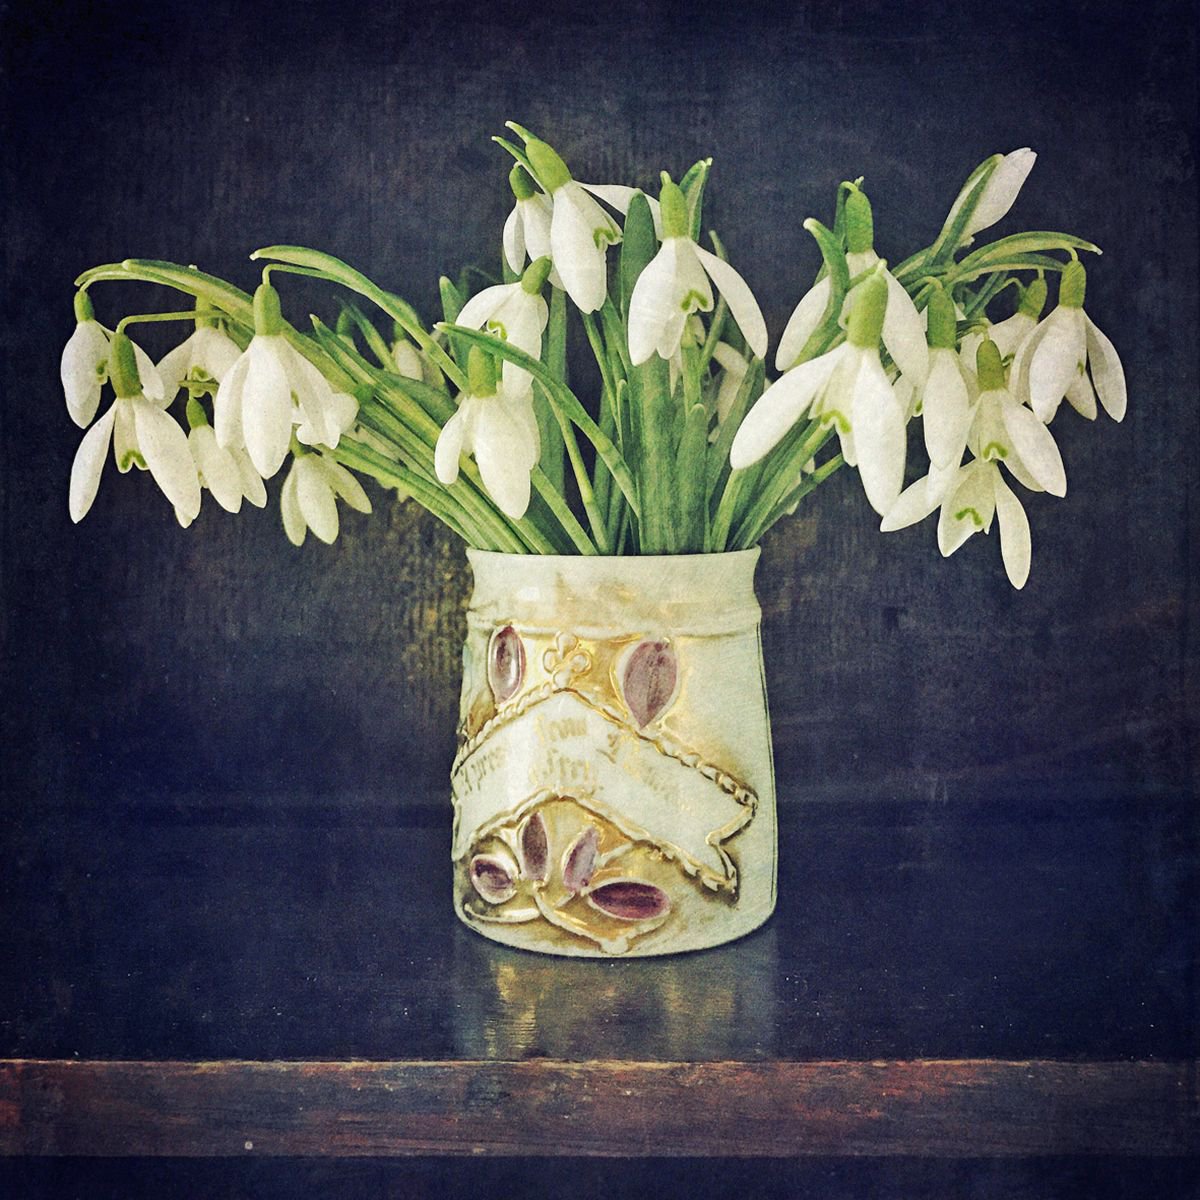 JUG OF SNOWDROPS by SARAH PARSONS